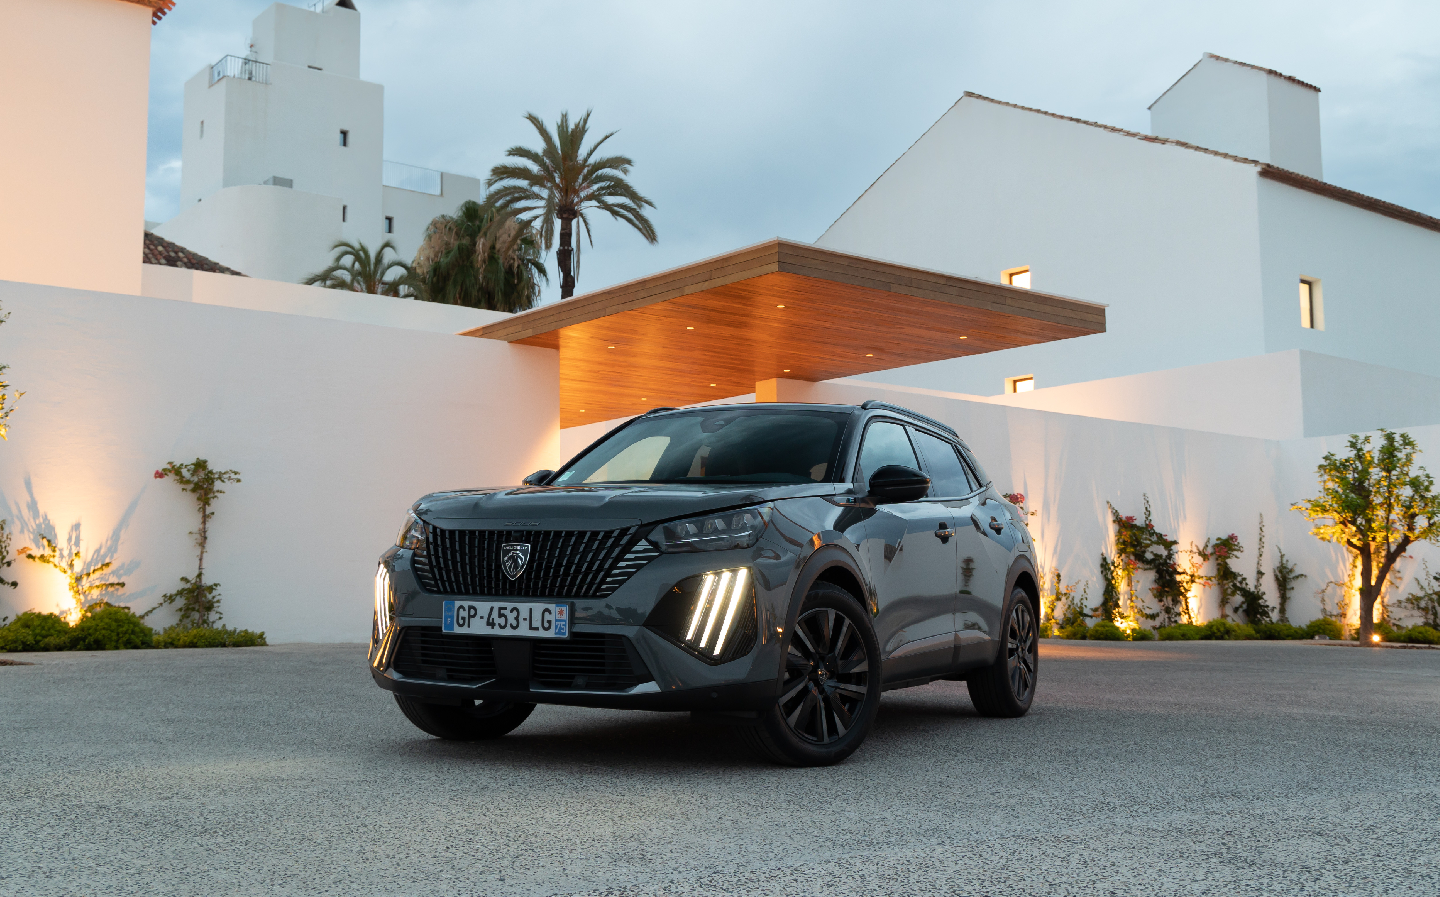 Peugeot 2008 SUV Features, Functions, Specification